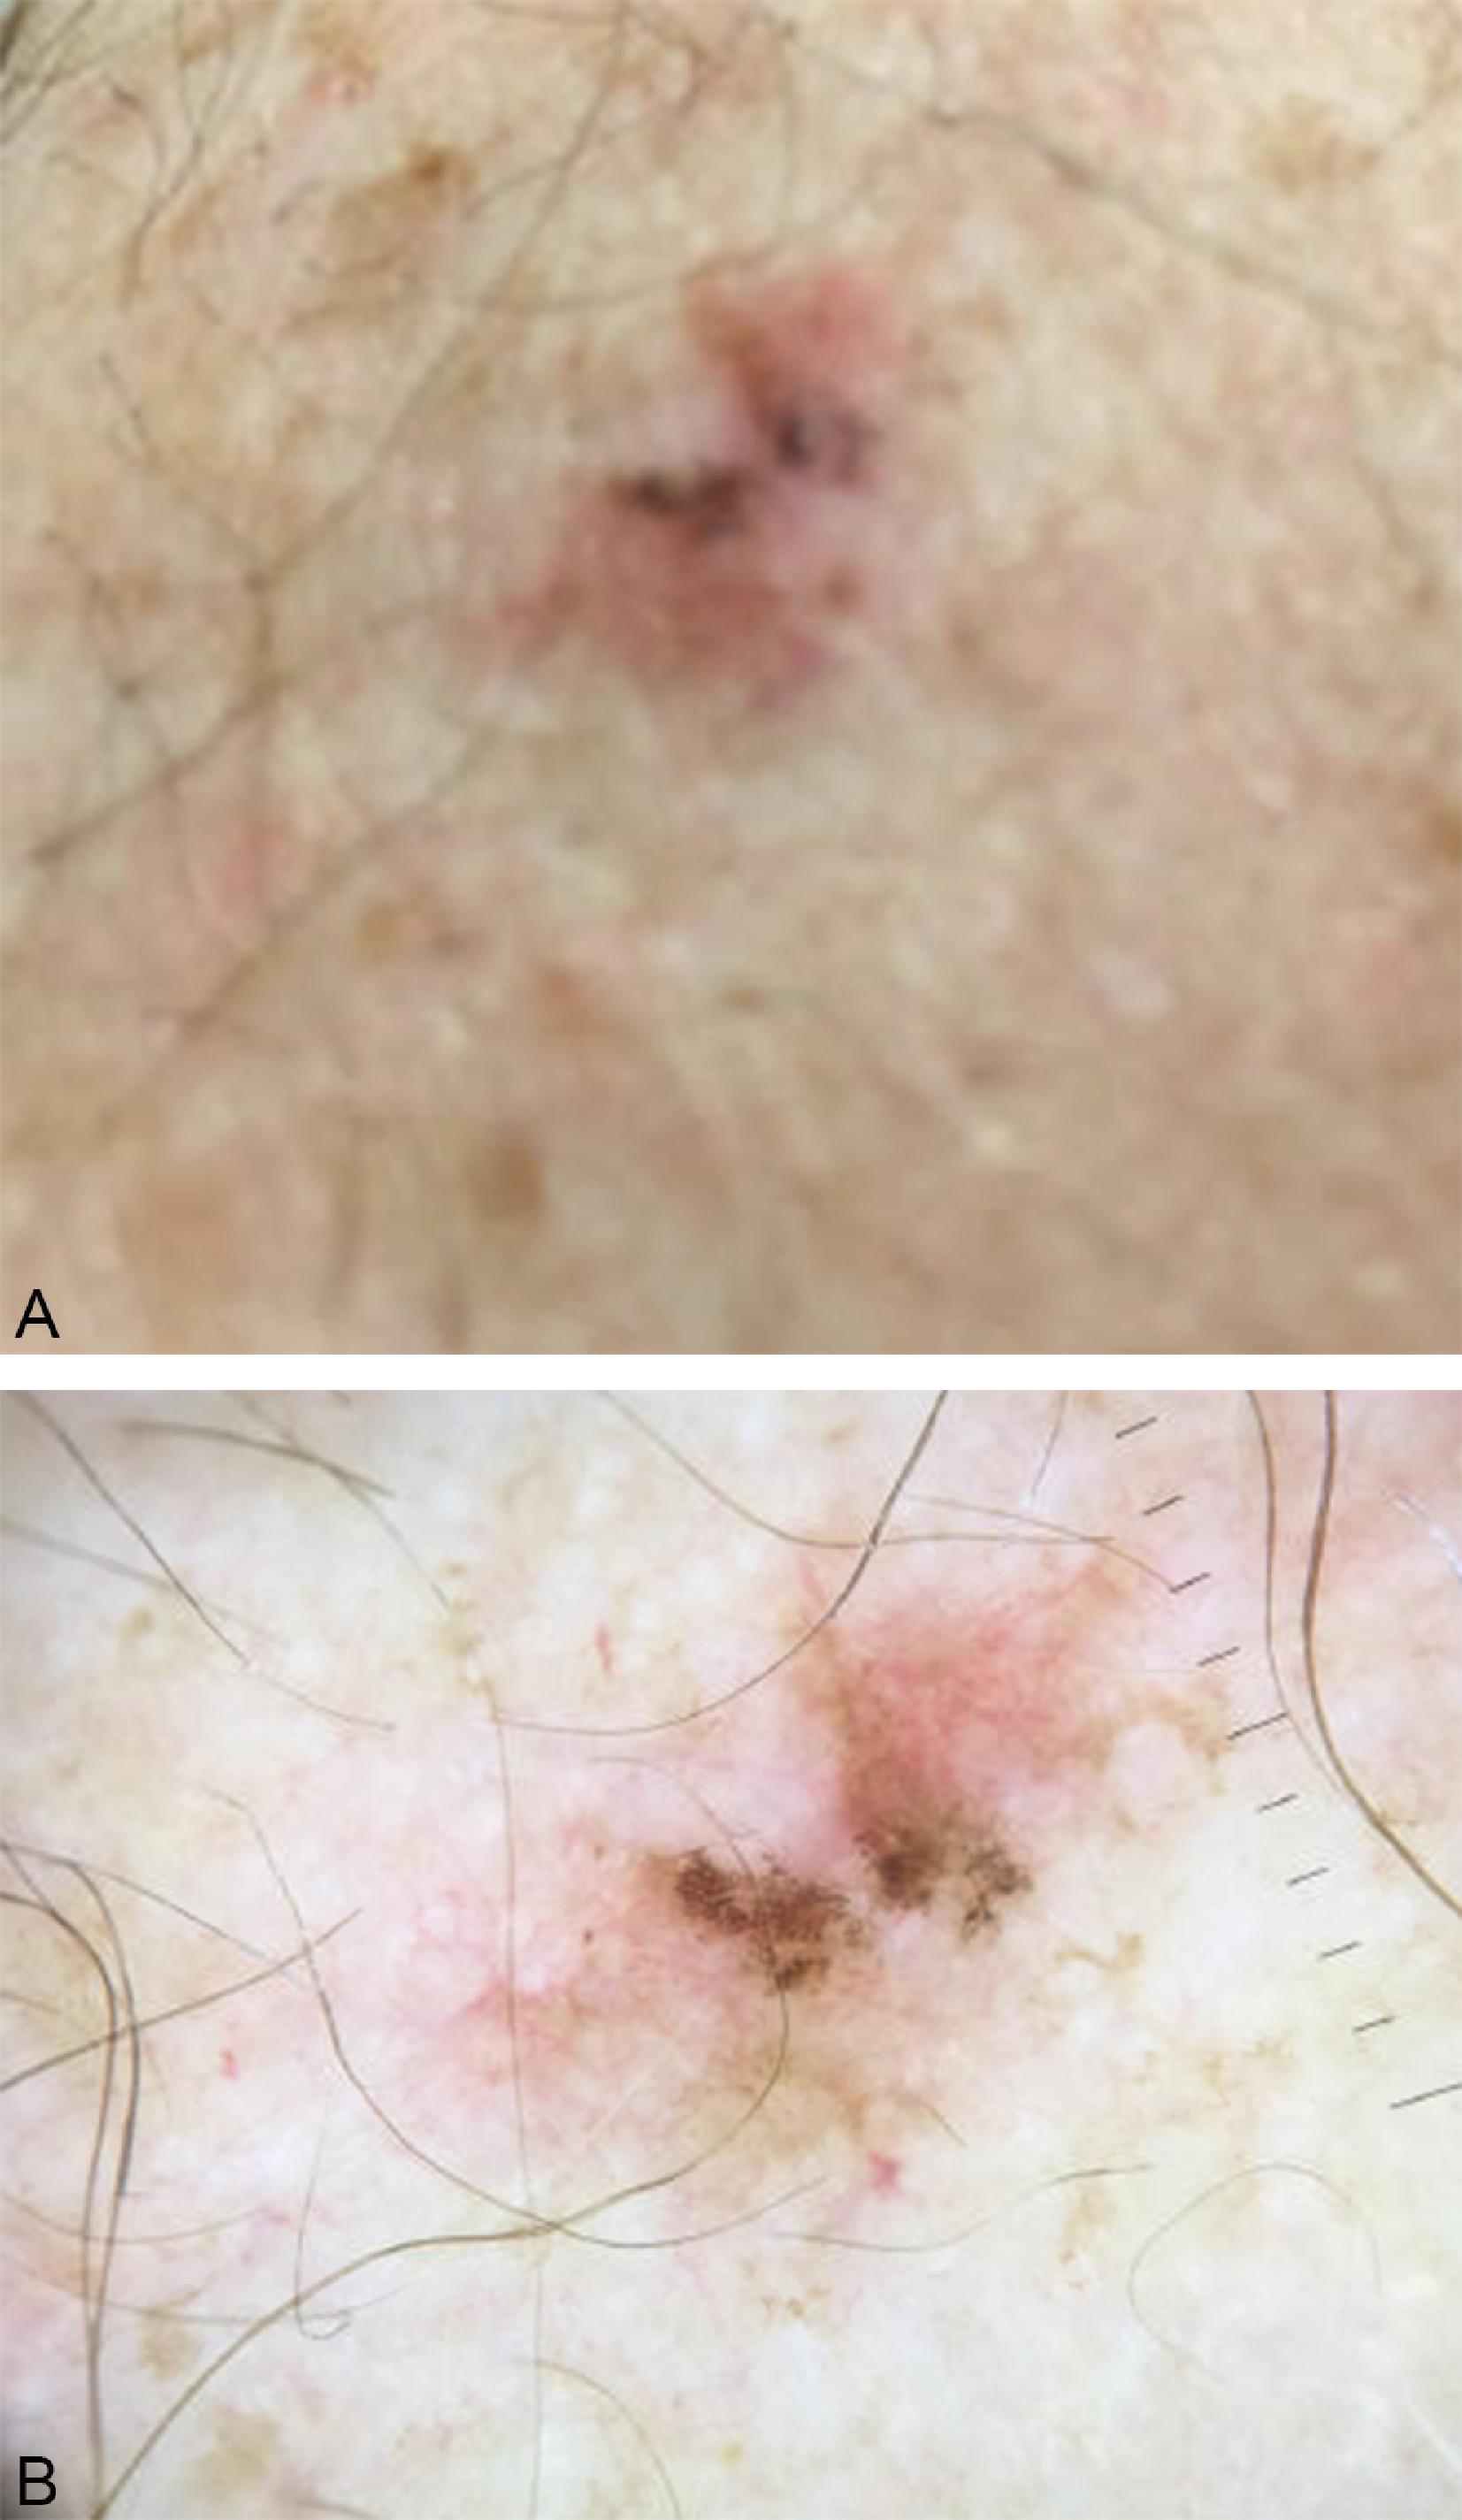 FIG. 5, Lentigo maligna melanoma. (A) Variegated colors of red, brown, and black with considerable pigment variation and multiple areas of regression are shown. (B) The same lesion under magnification clearly demonstrates areas of central and peripheral irregular regression.